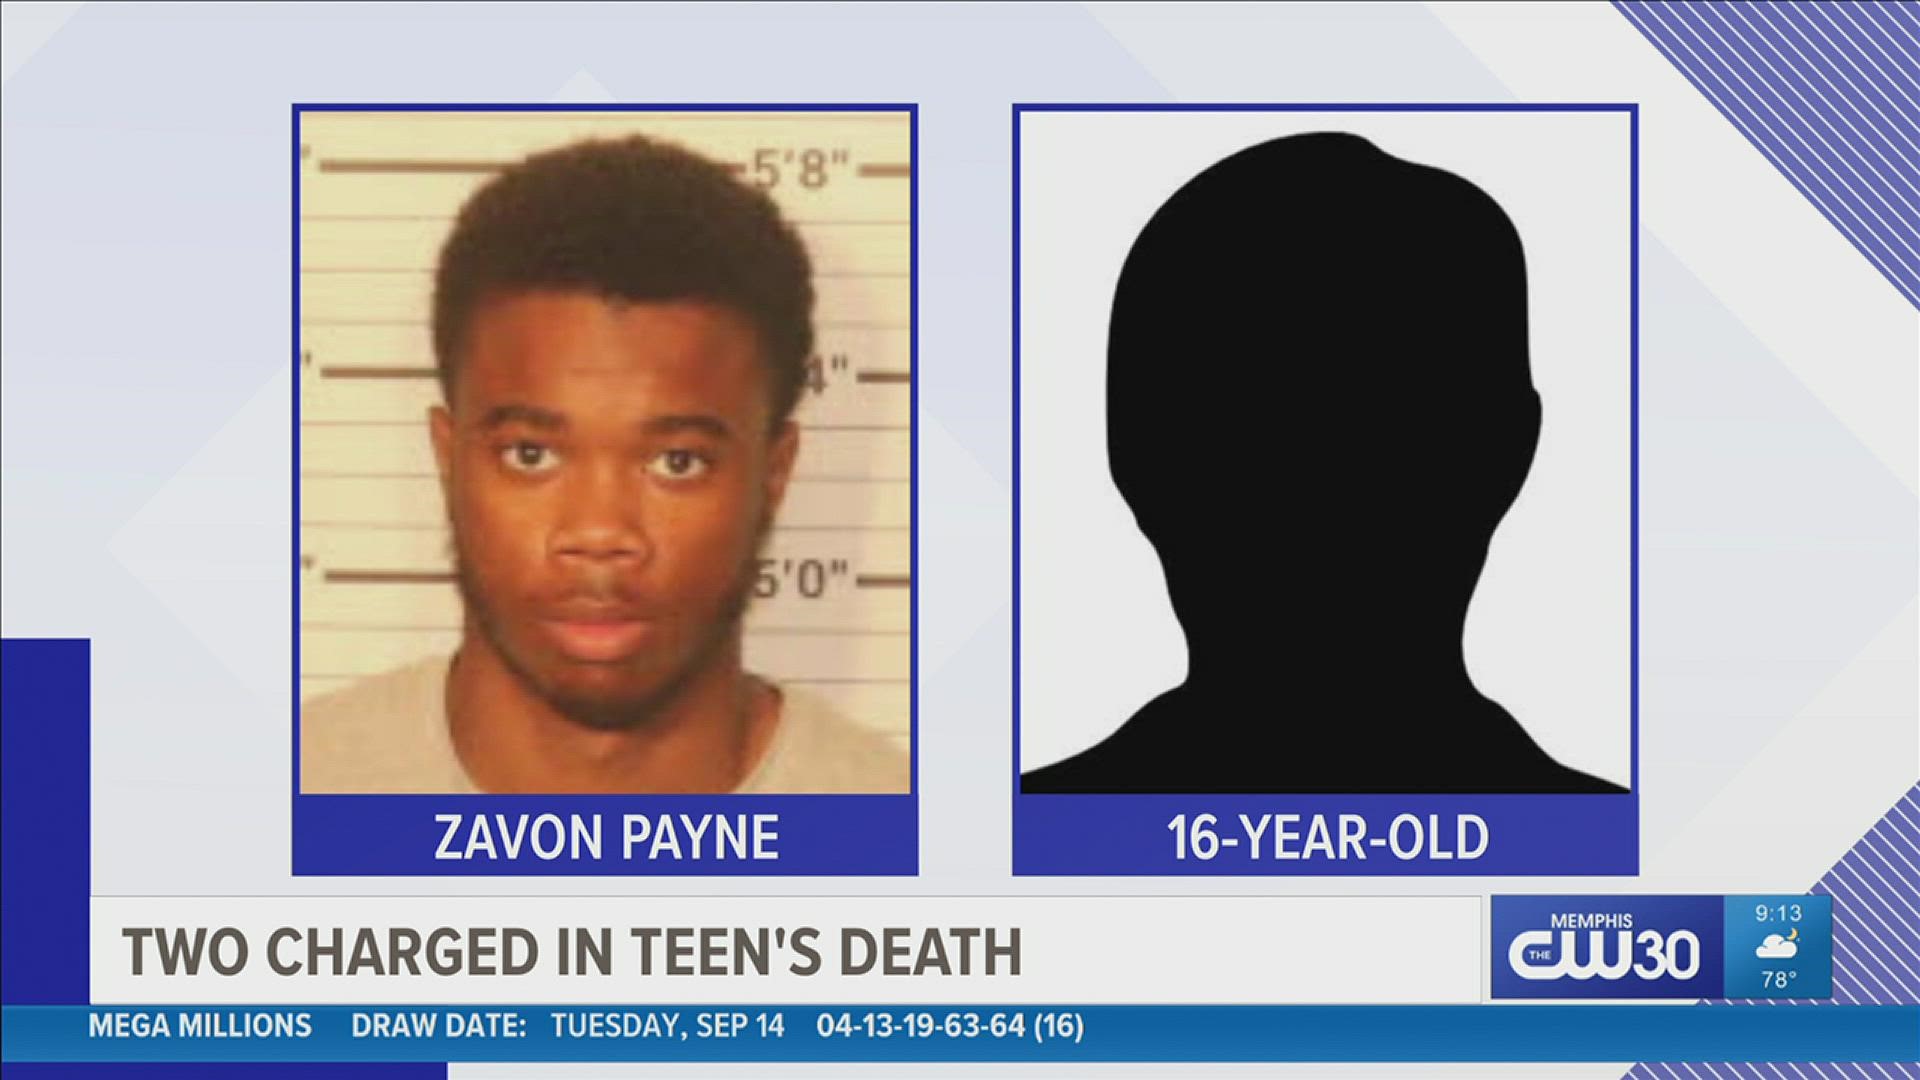 Two teenagers have been arrested and charged, according to the Memphis Police Department.